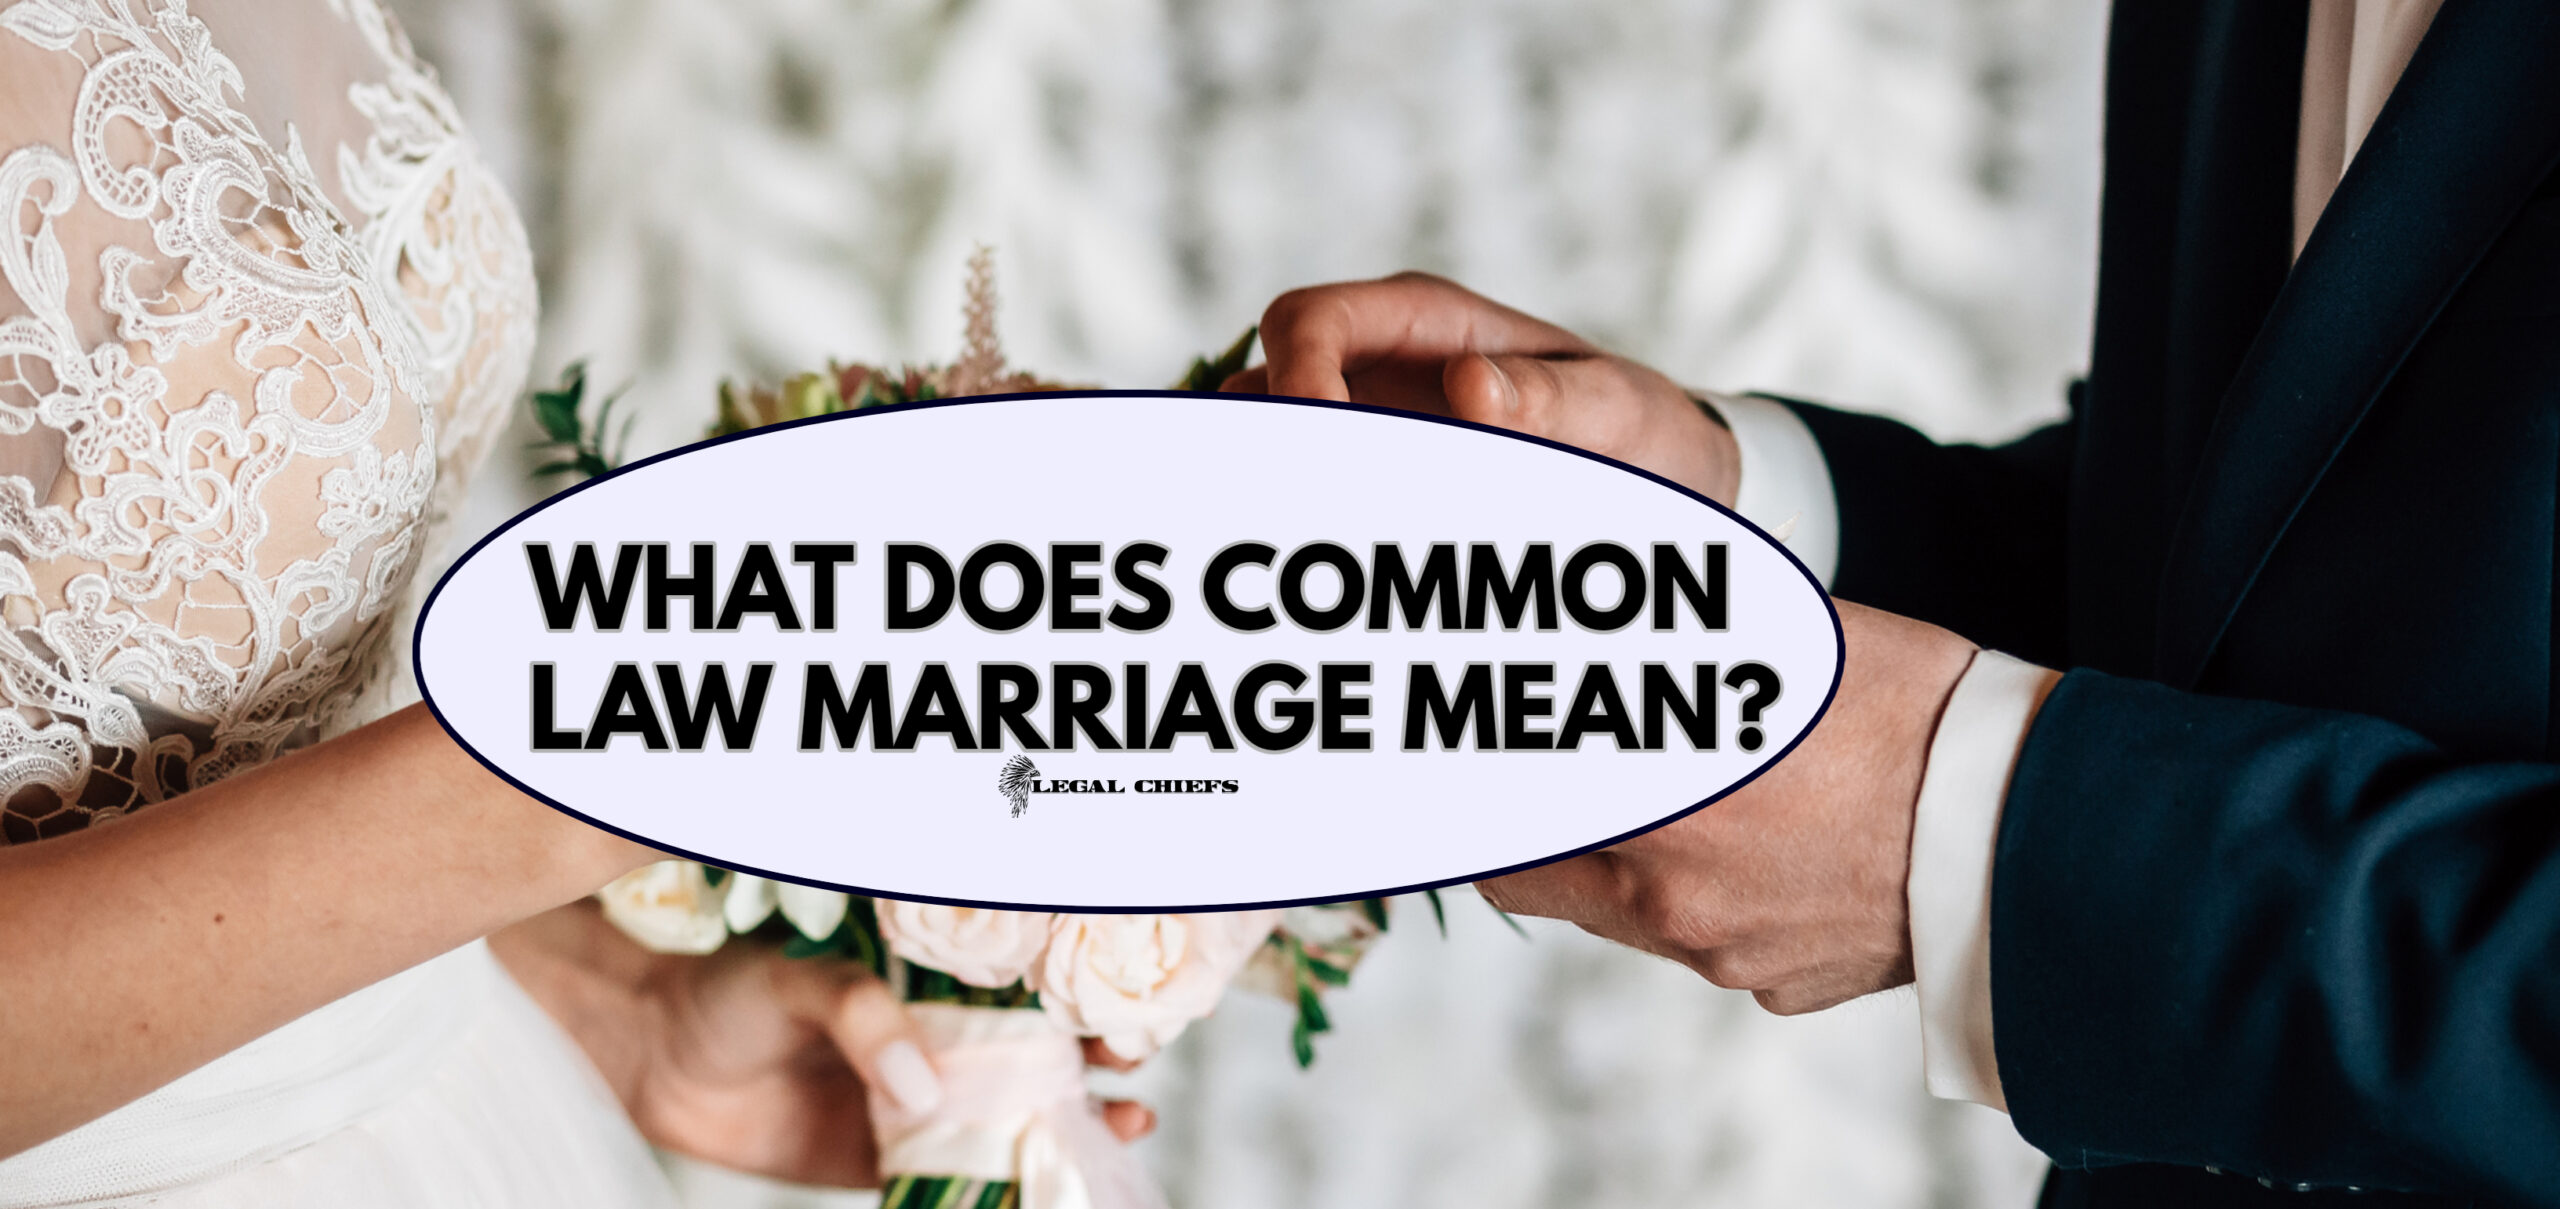 what does common law marriage mean?